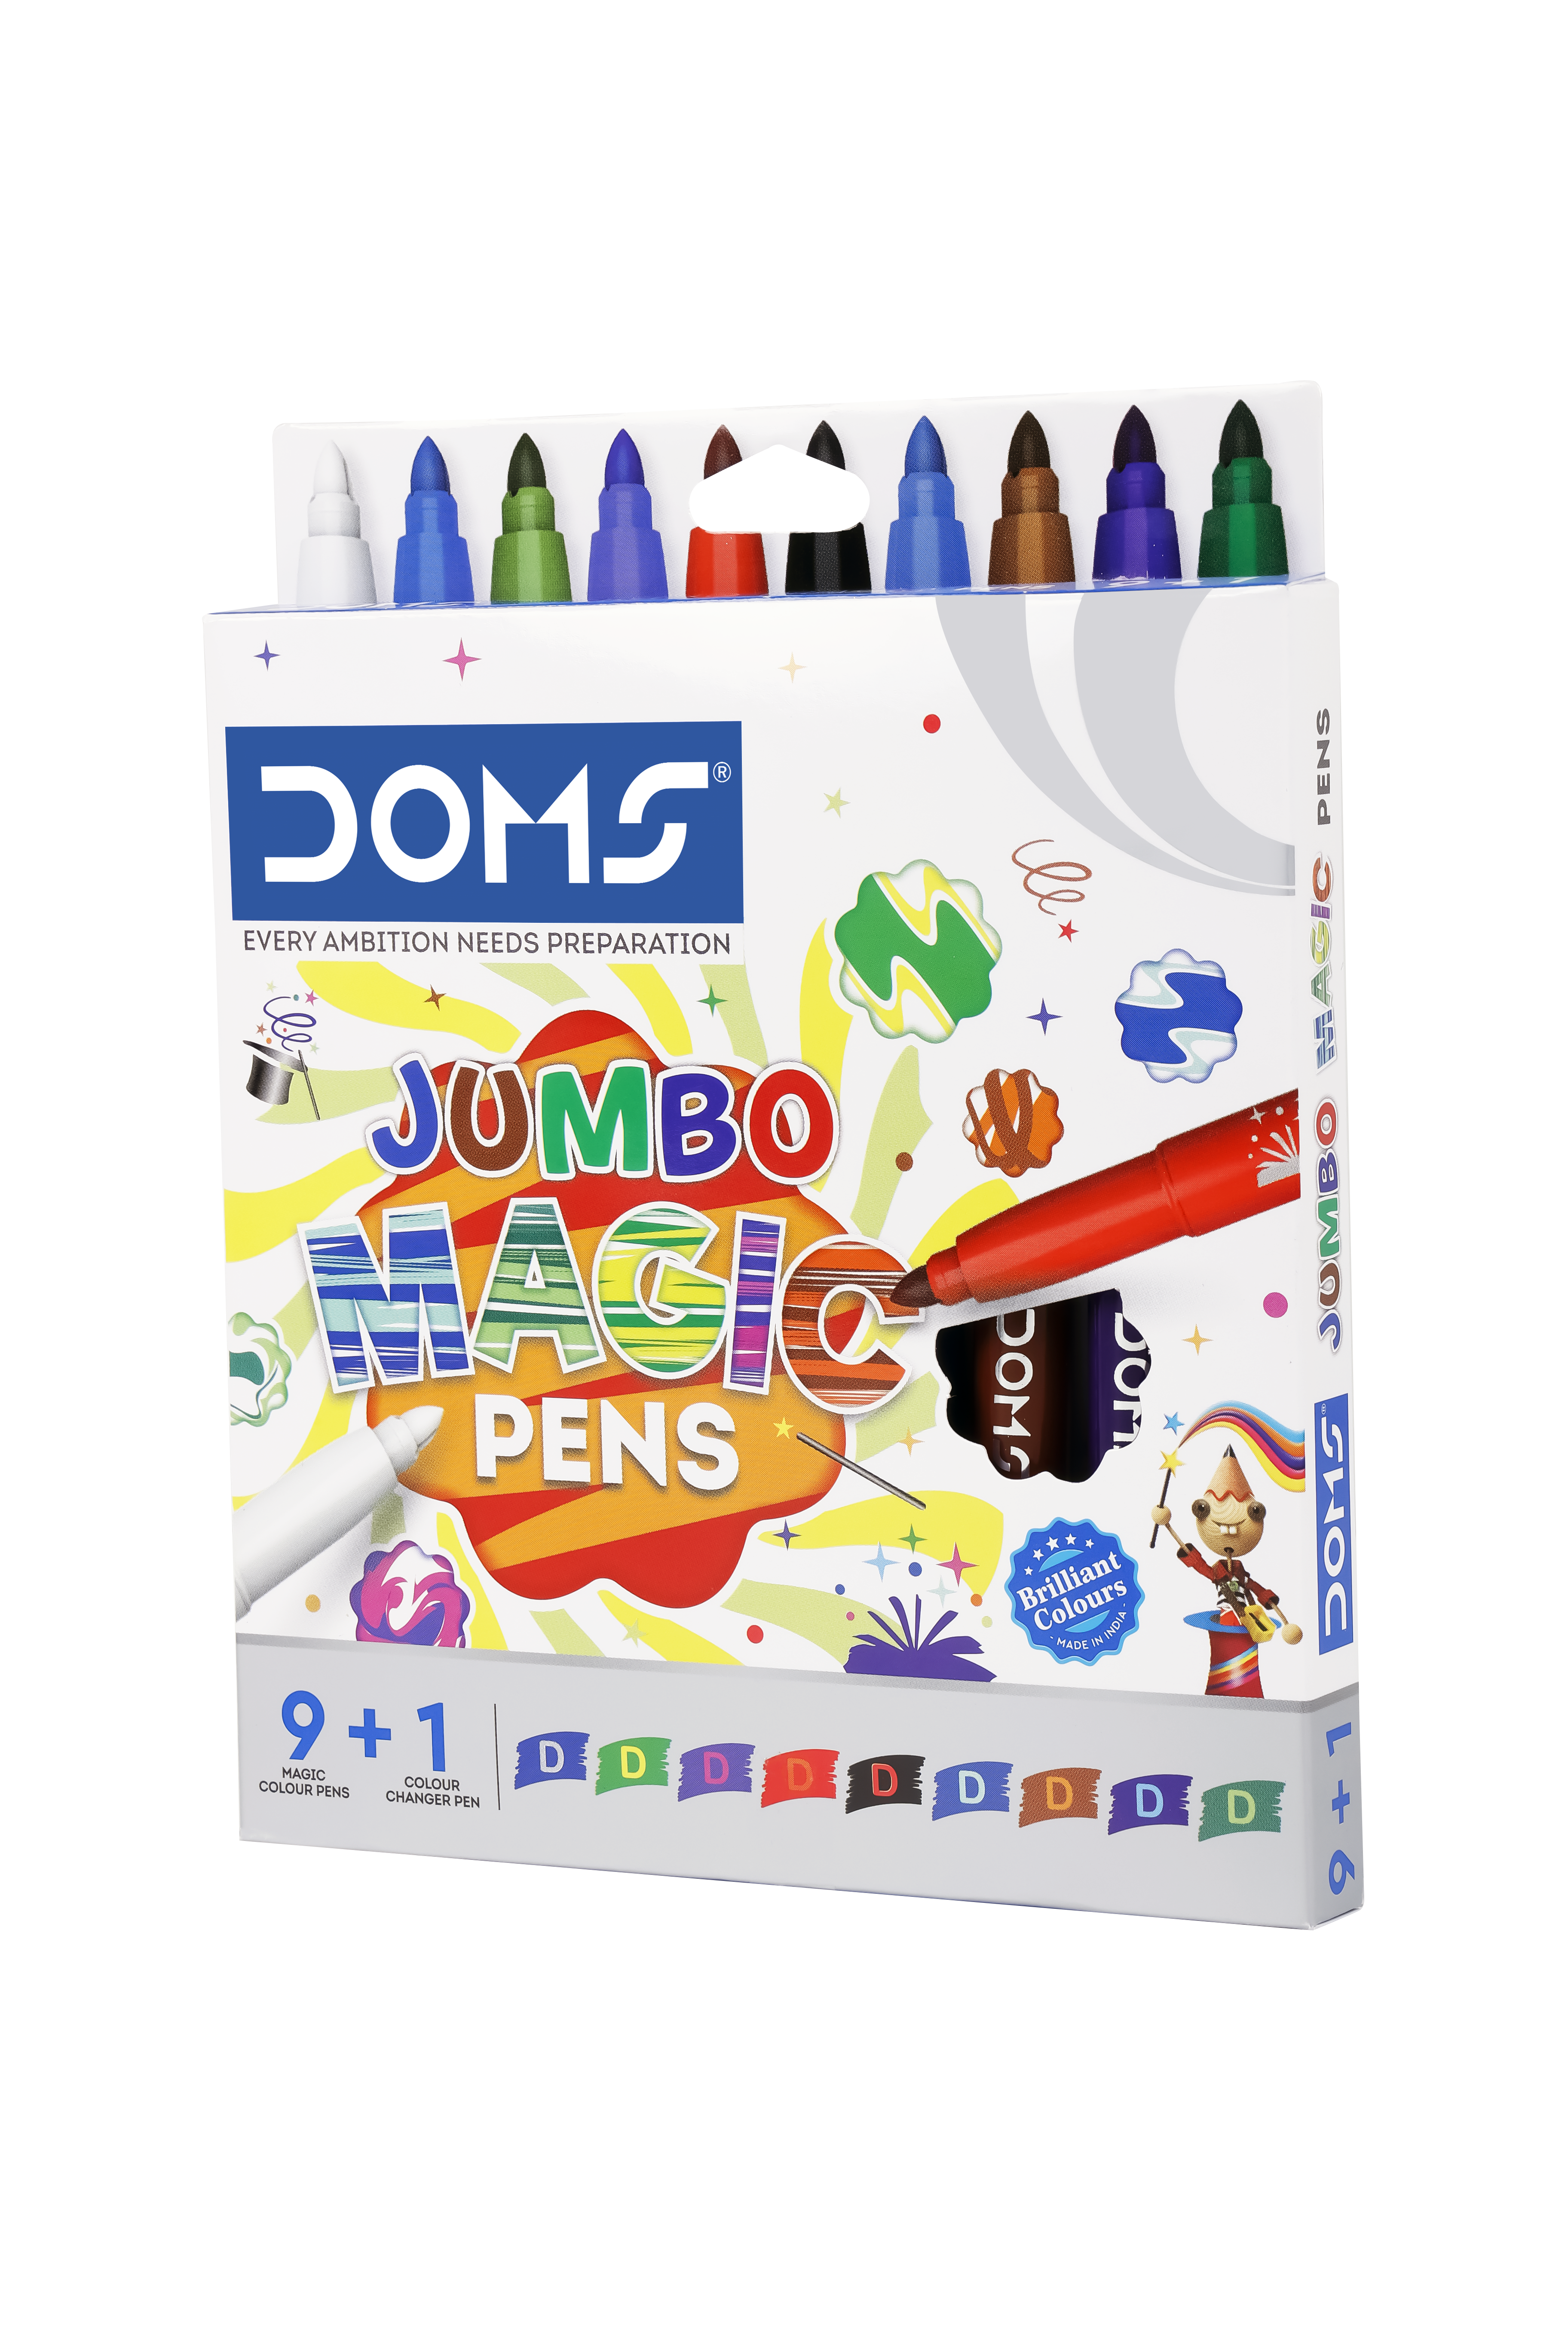 DOMS BRUSH PEN  DOMS brings a whole new range of Brush Pens with